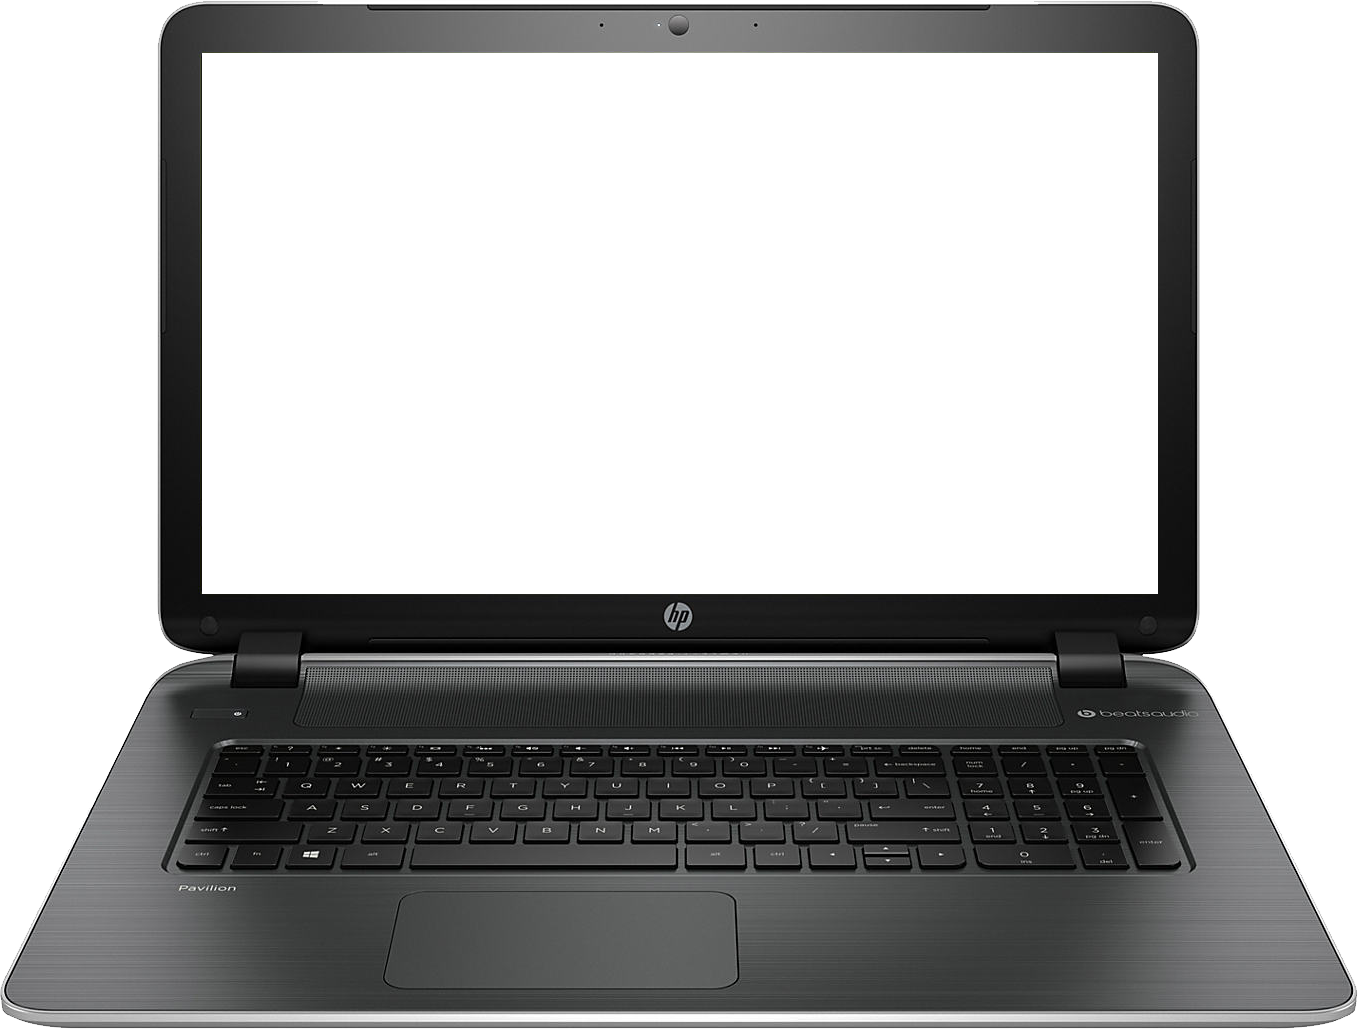 Laptops Images Notebook Image Laptop Image Clipart